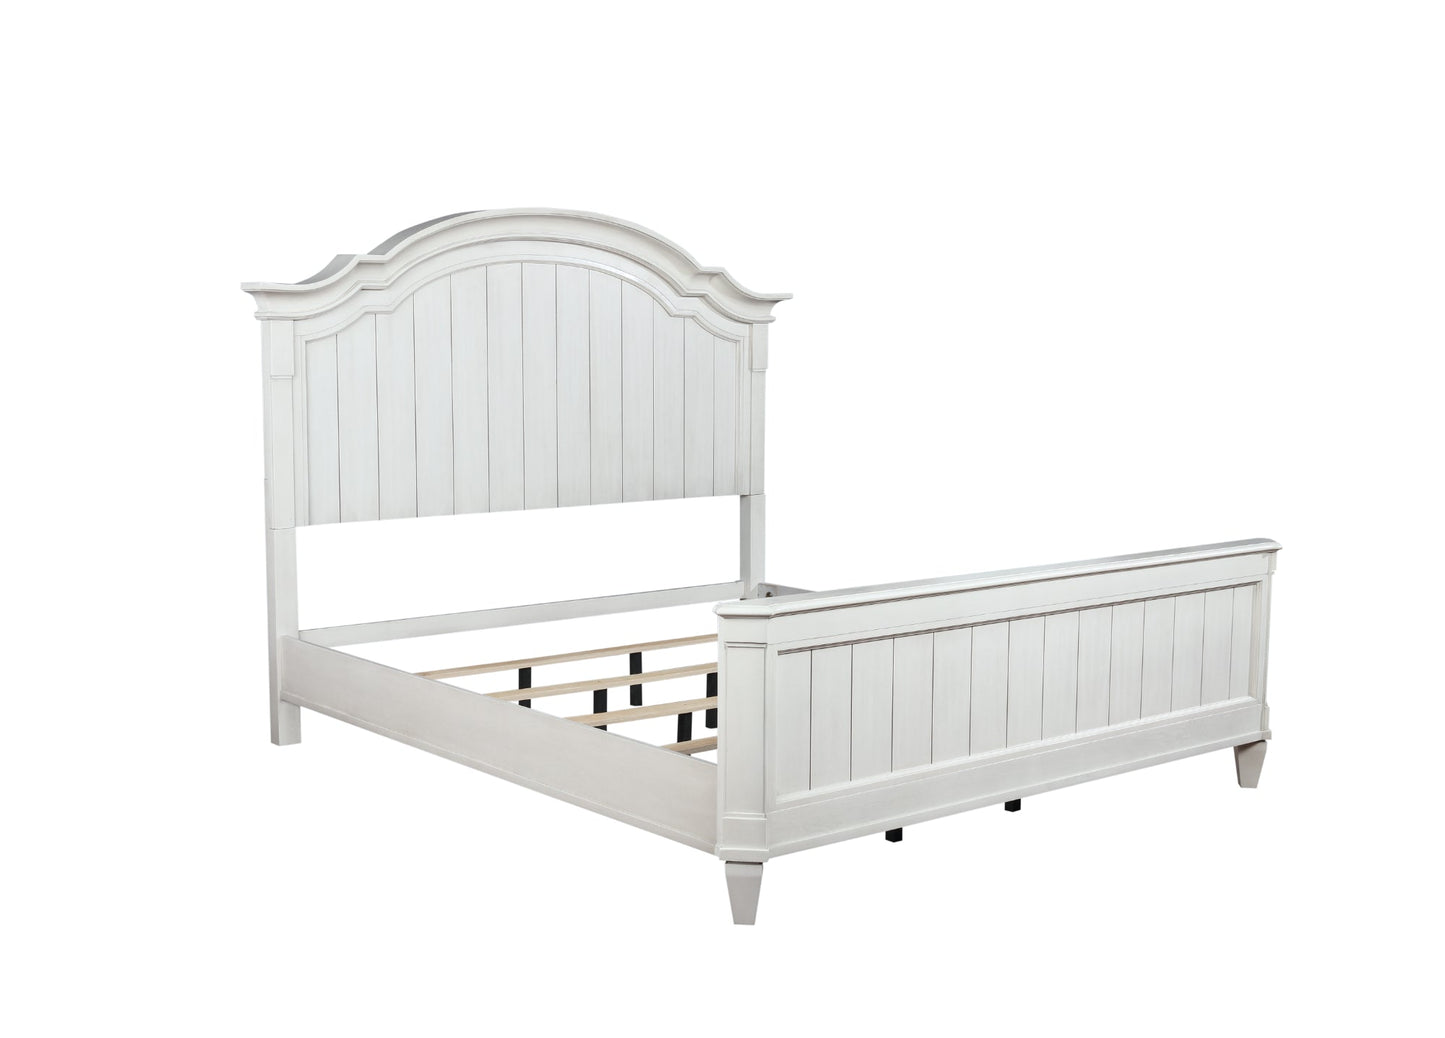 Saline Wood Camelback Planked Bed in White Finish